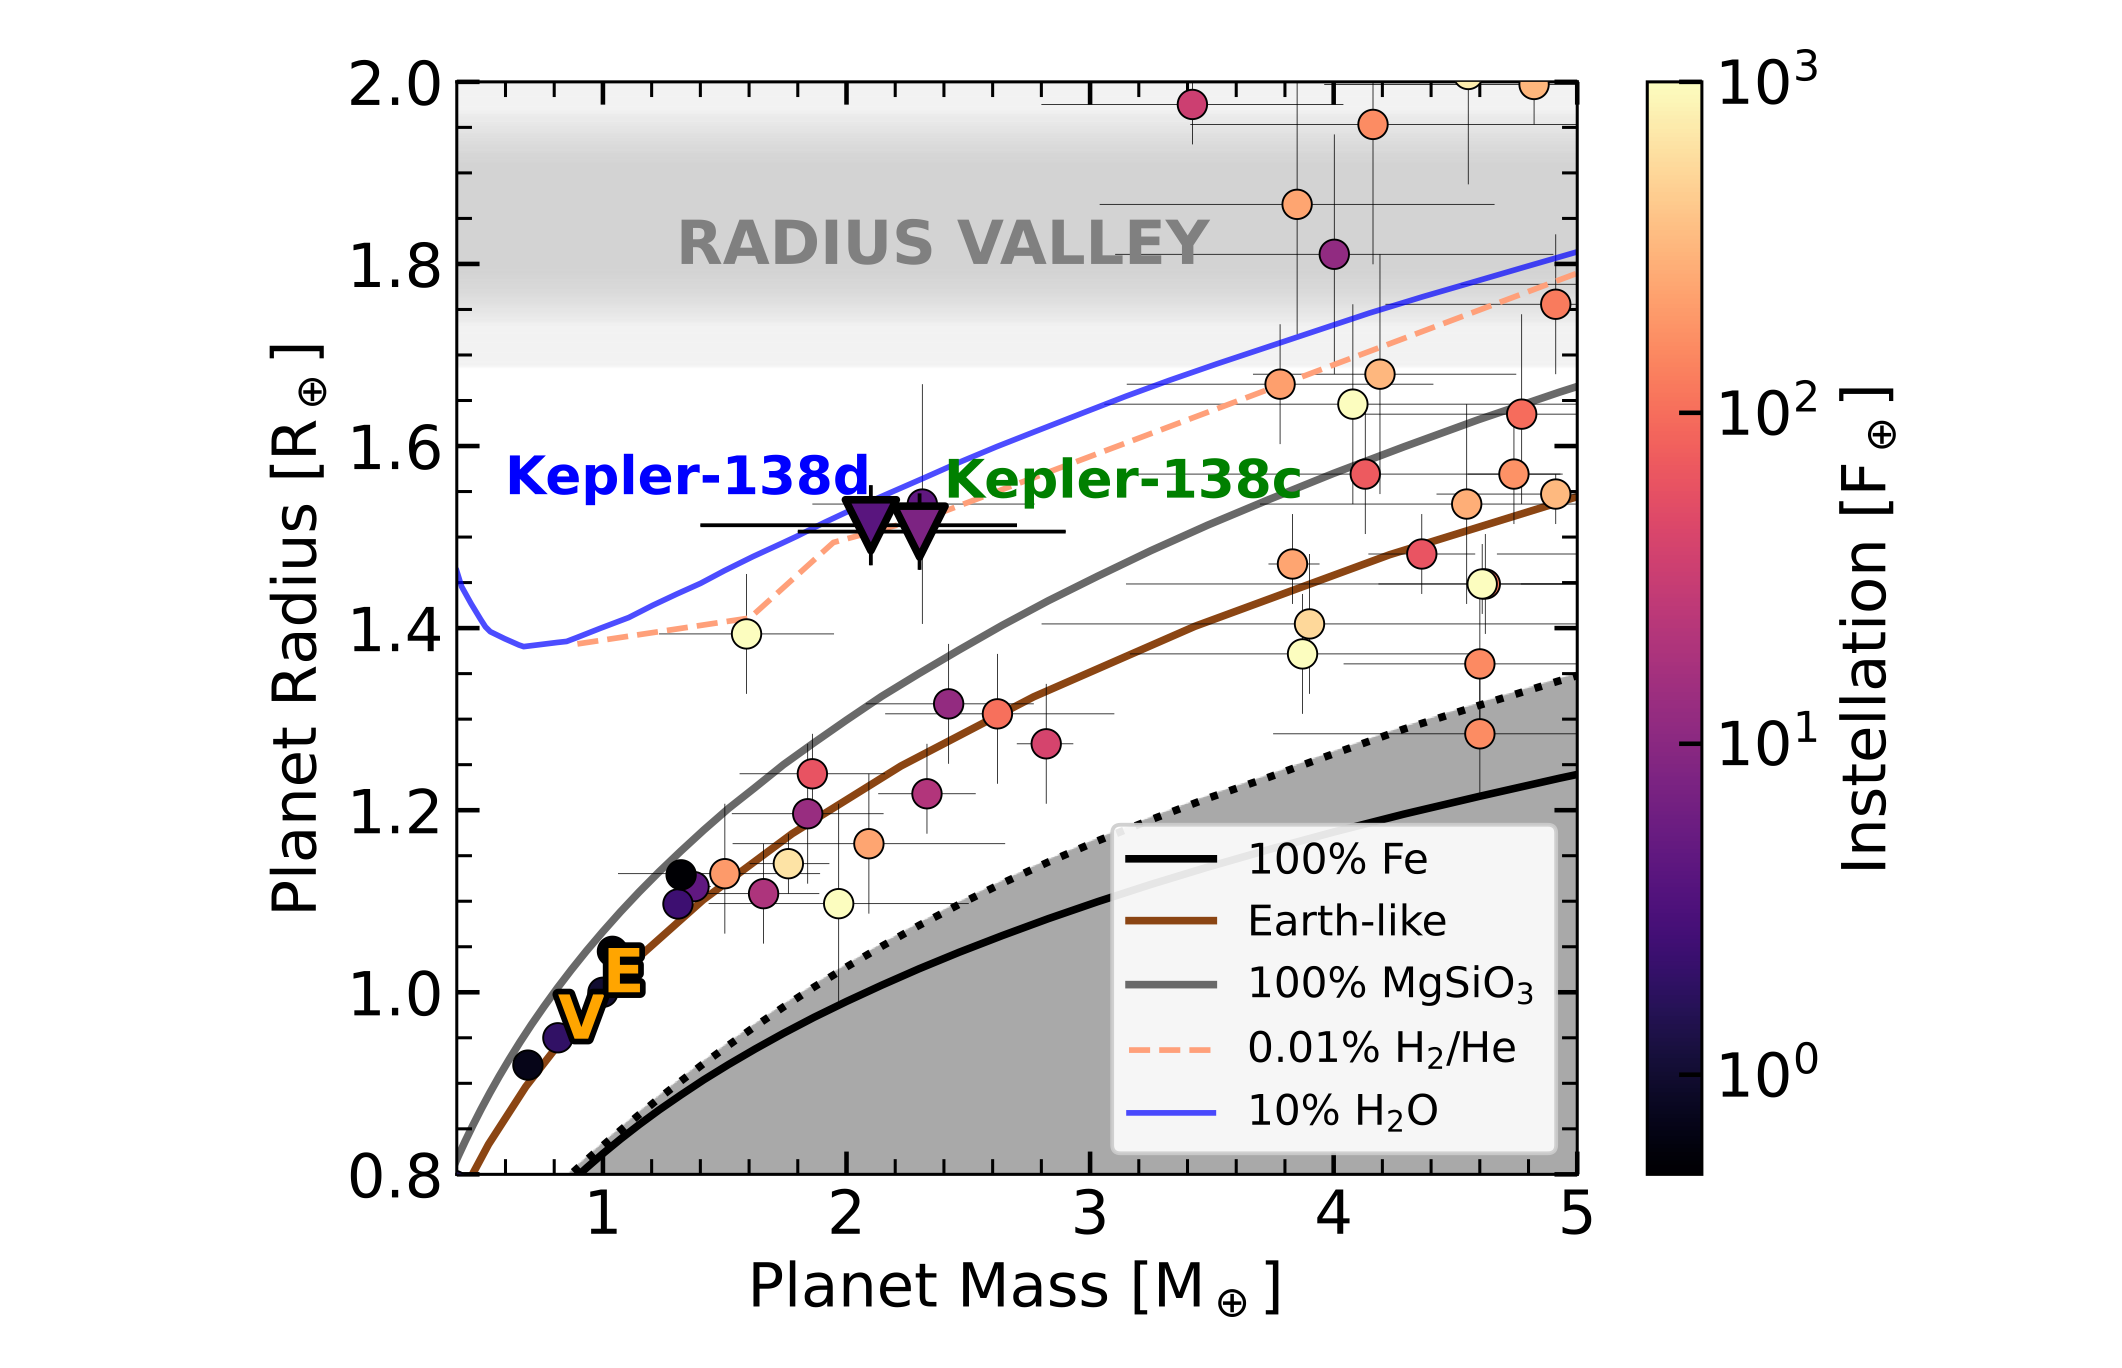 Evidence For The Volatile-rich Composition Of O 1.5-R⊕ Planet